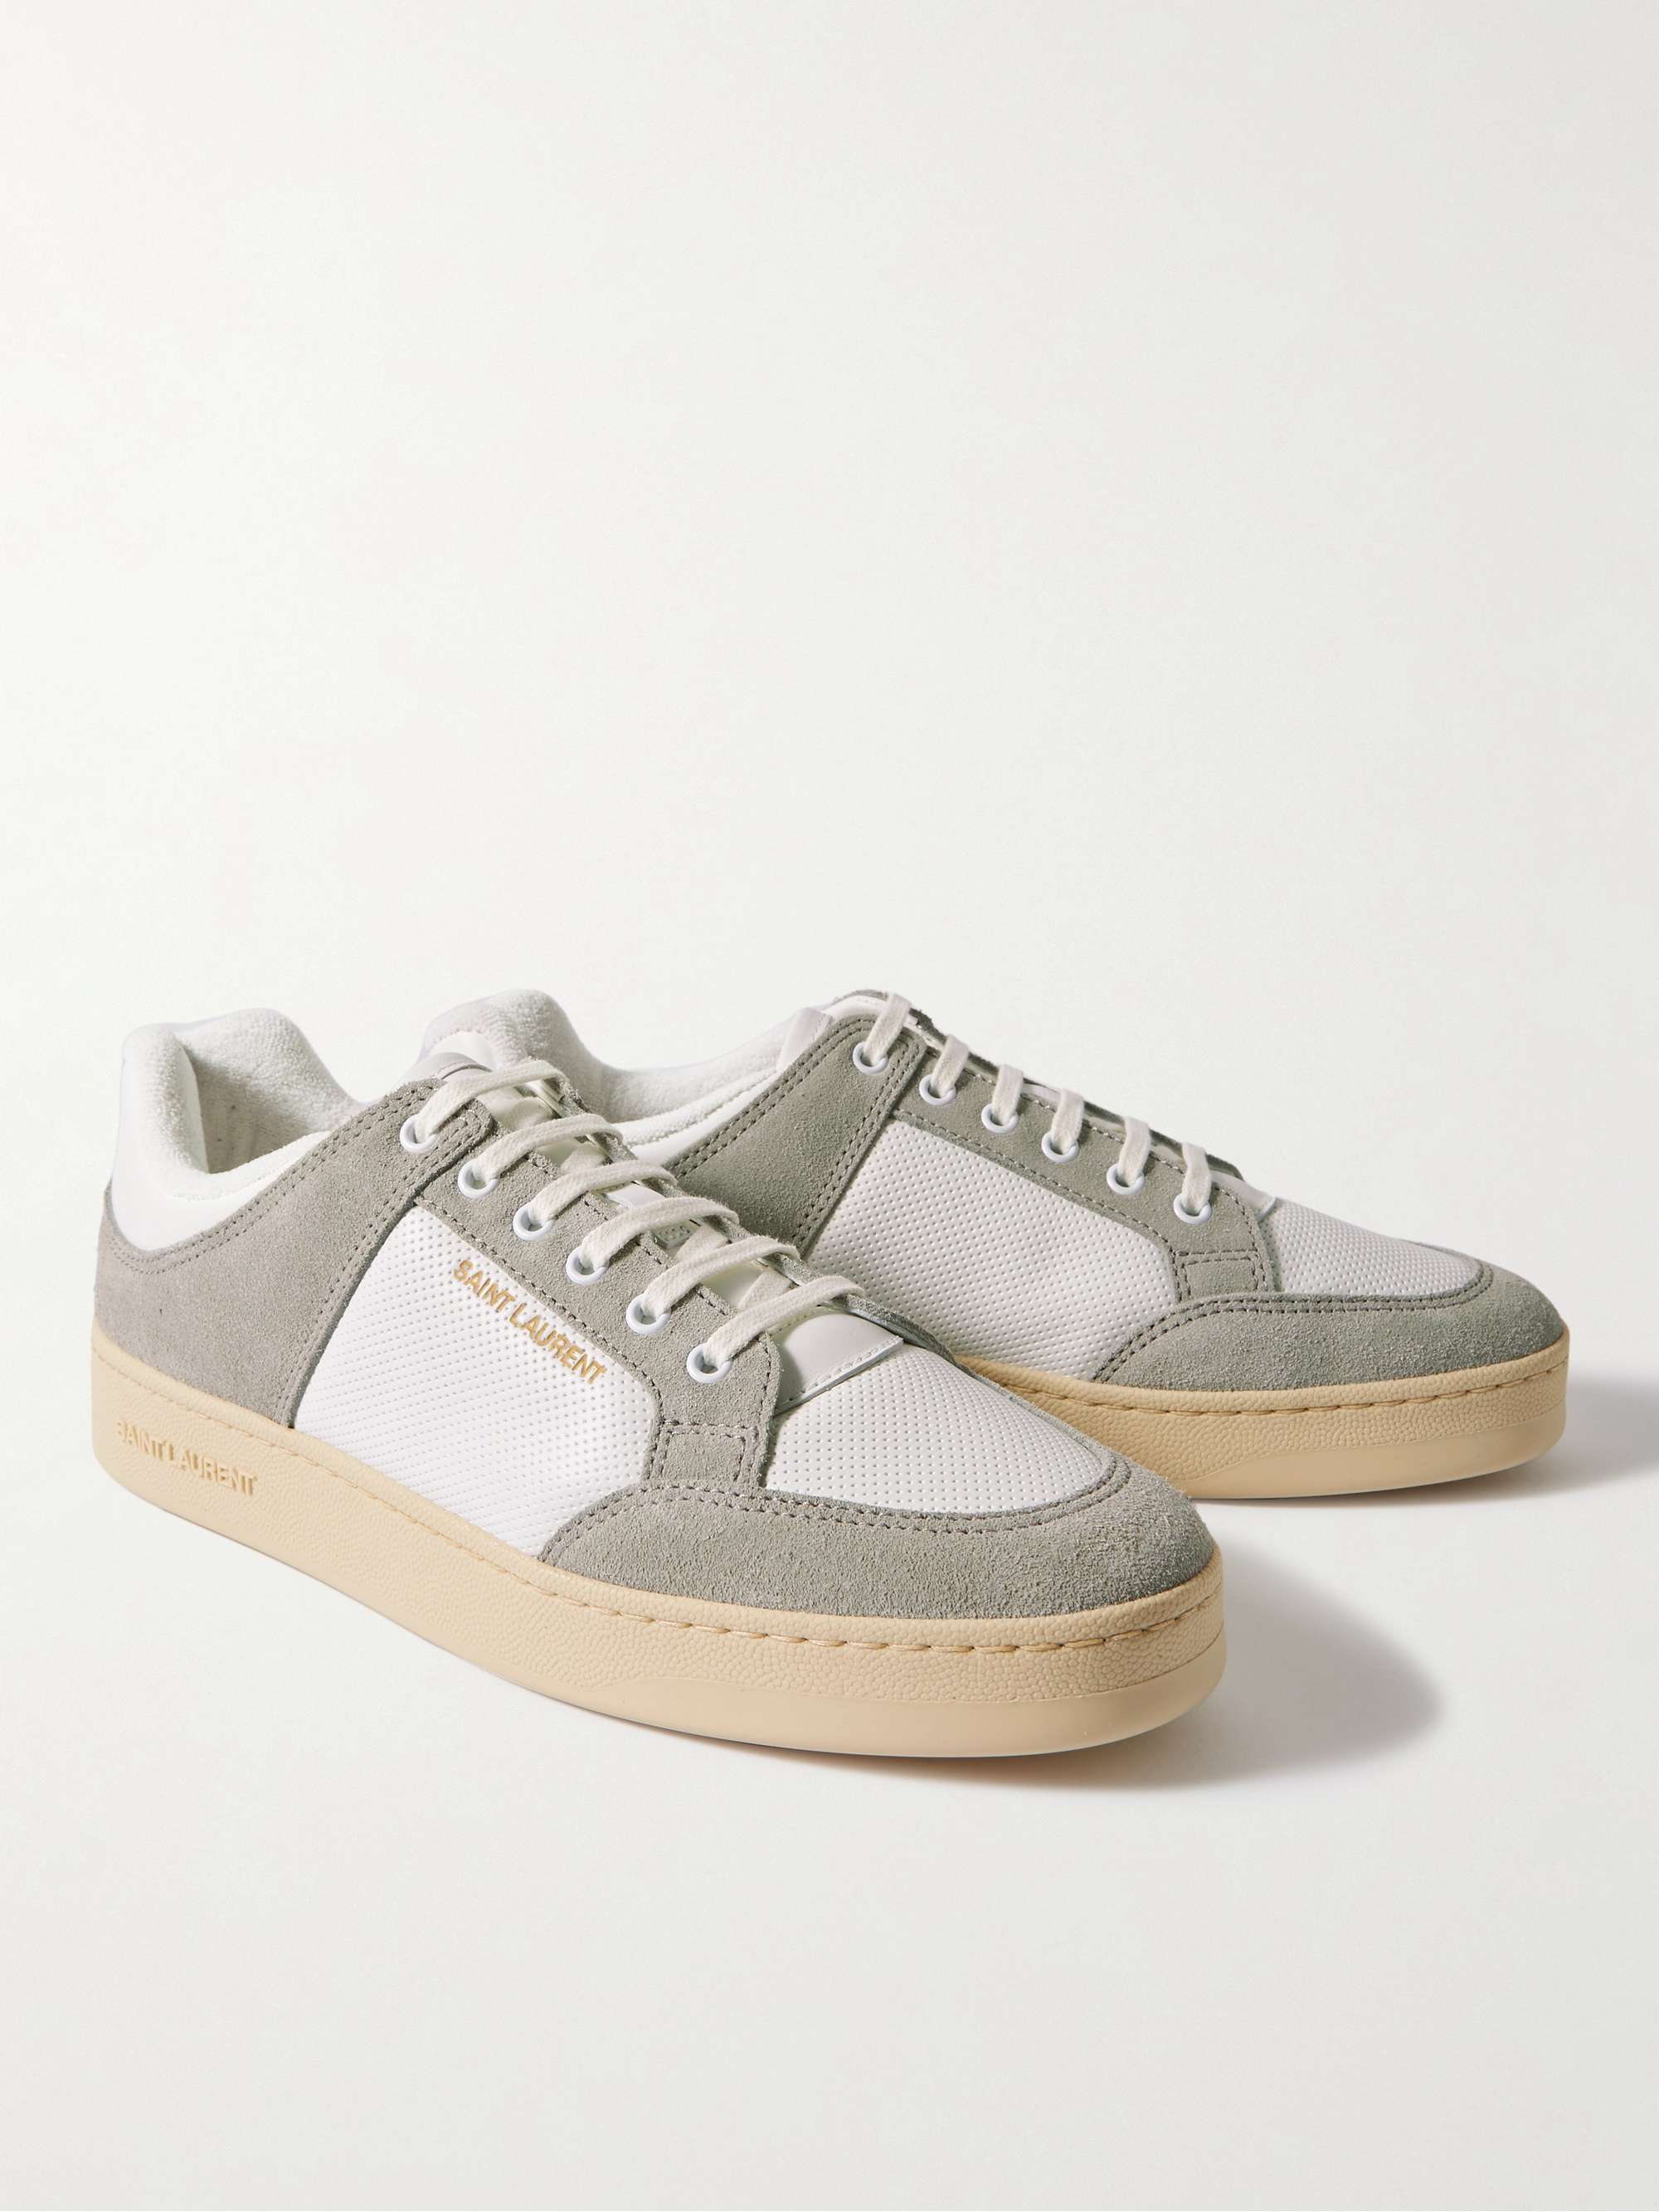 SAINT LAURENT SL/61 Perforated Leather and Suede Sneakers